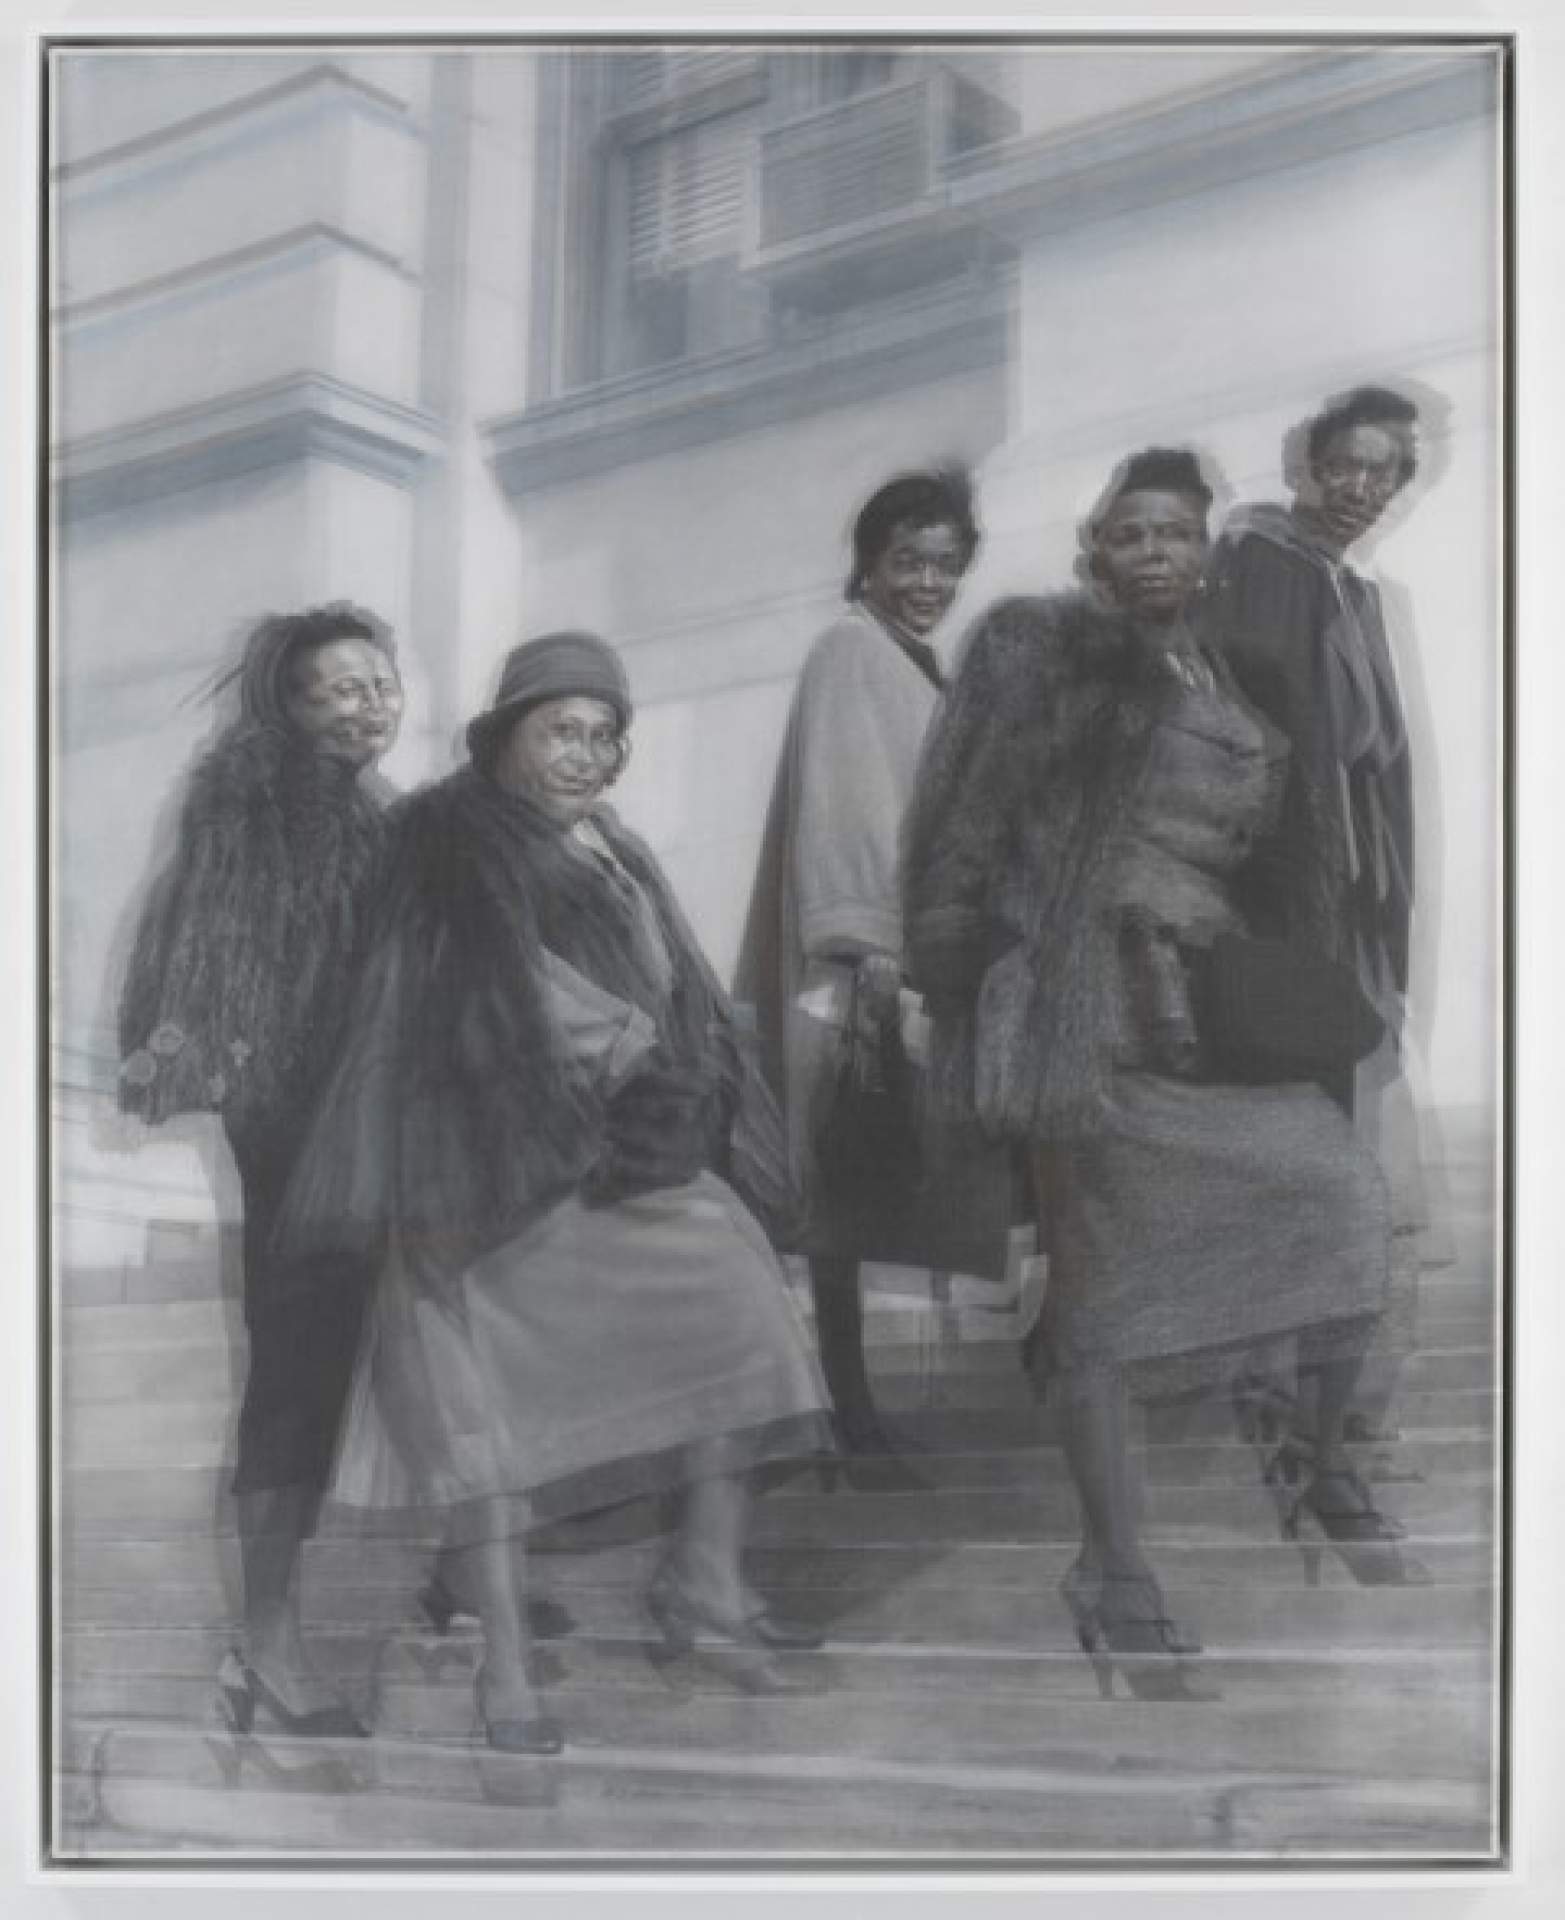 Ruby Blackburn and Four Women on Steps (after unknown photographer, Auburn Avenue Research Library Collection